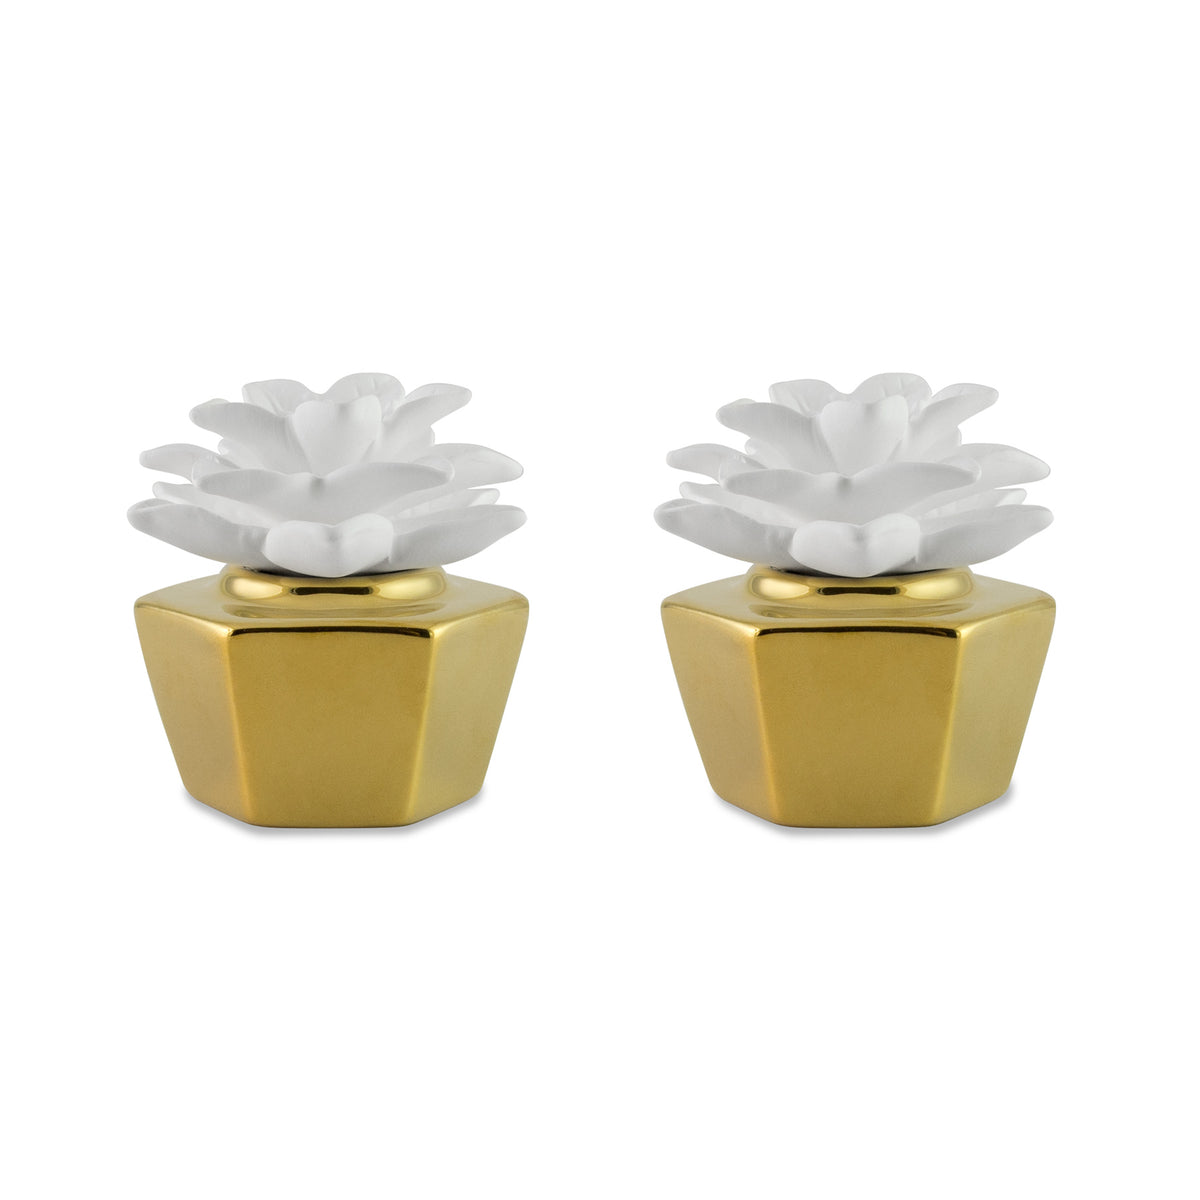 Elegance Gold Clay Diffuser Set of 2